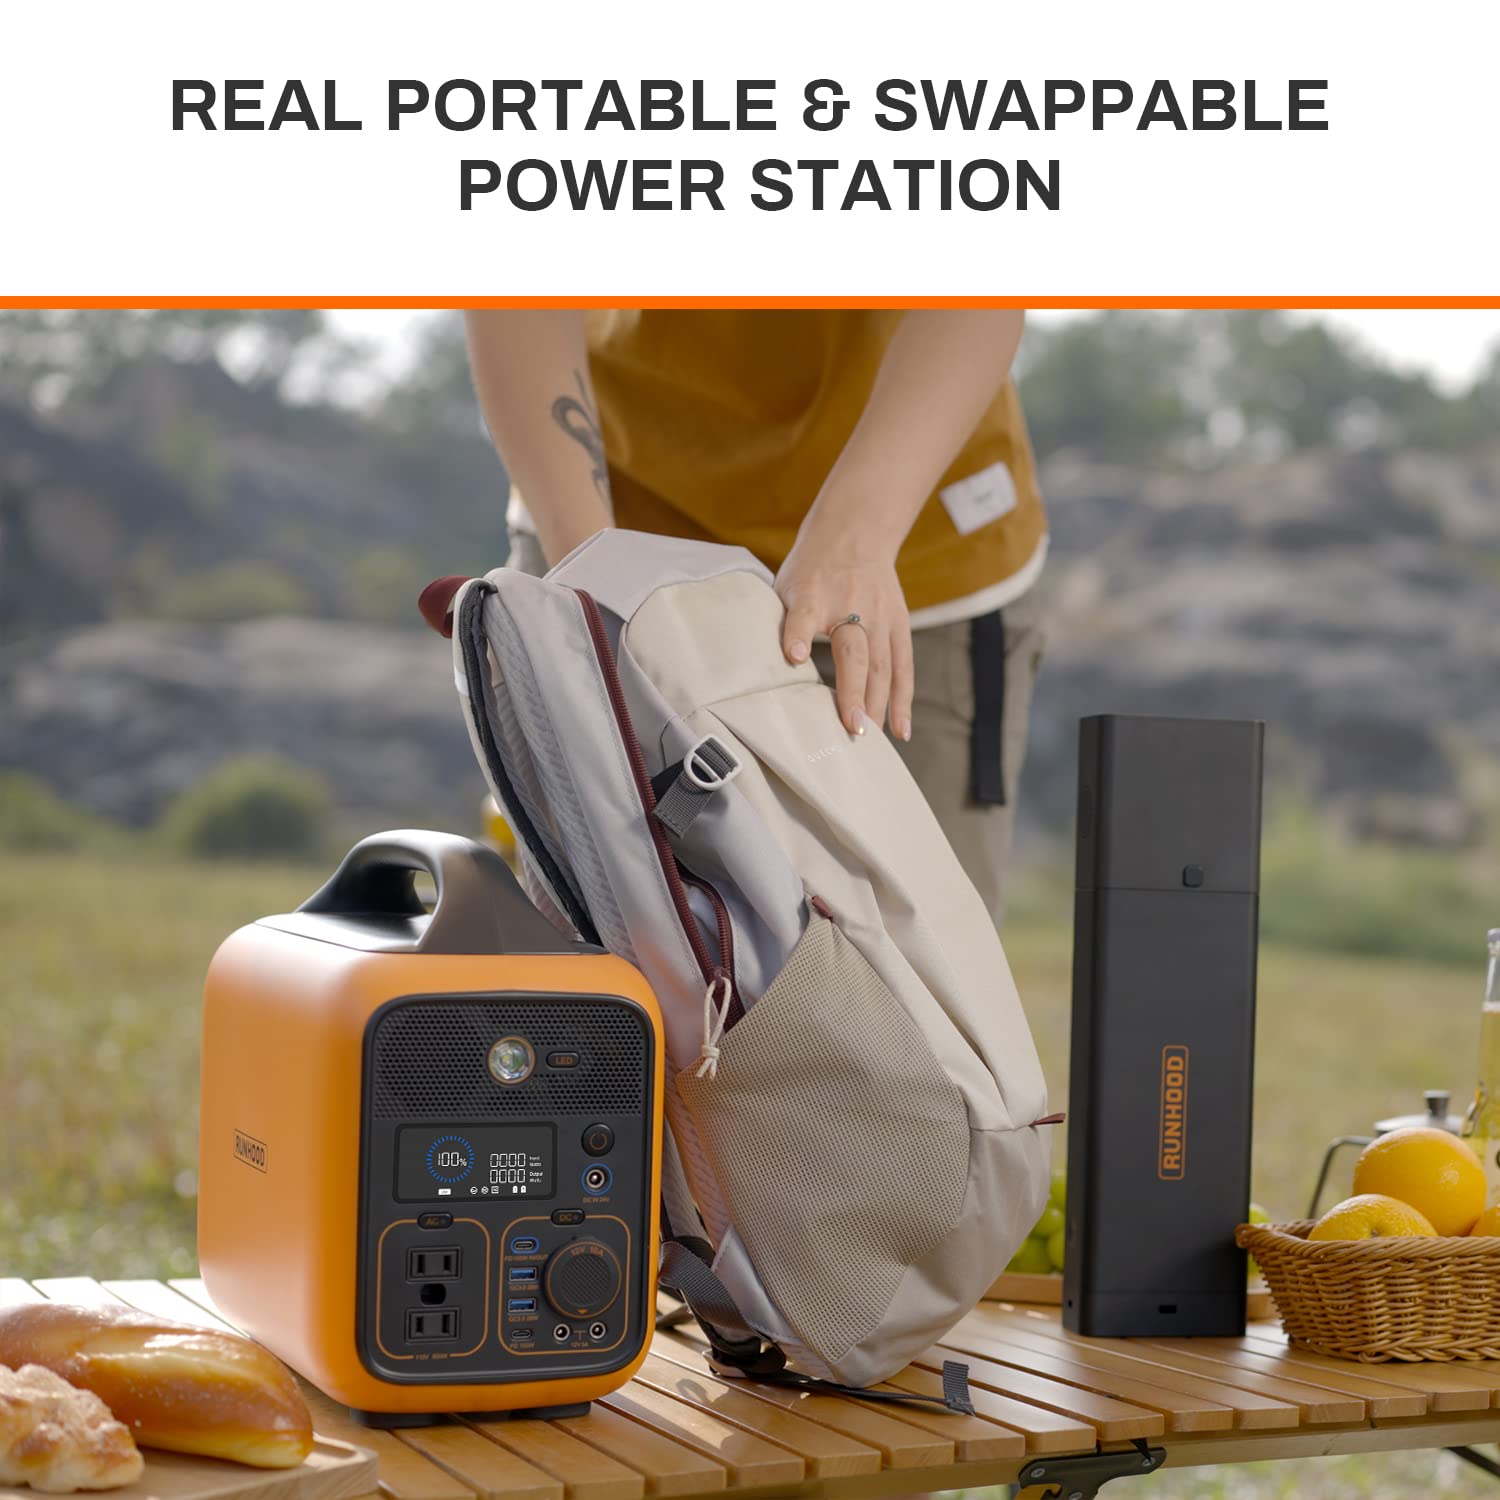 RALLYE 600 PRO ( 1296Wh/600W. Portable power station with 100W solar panel）